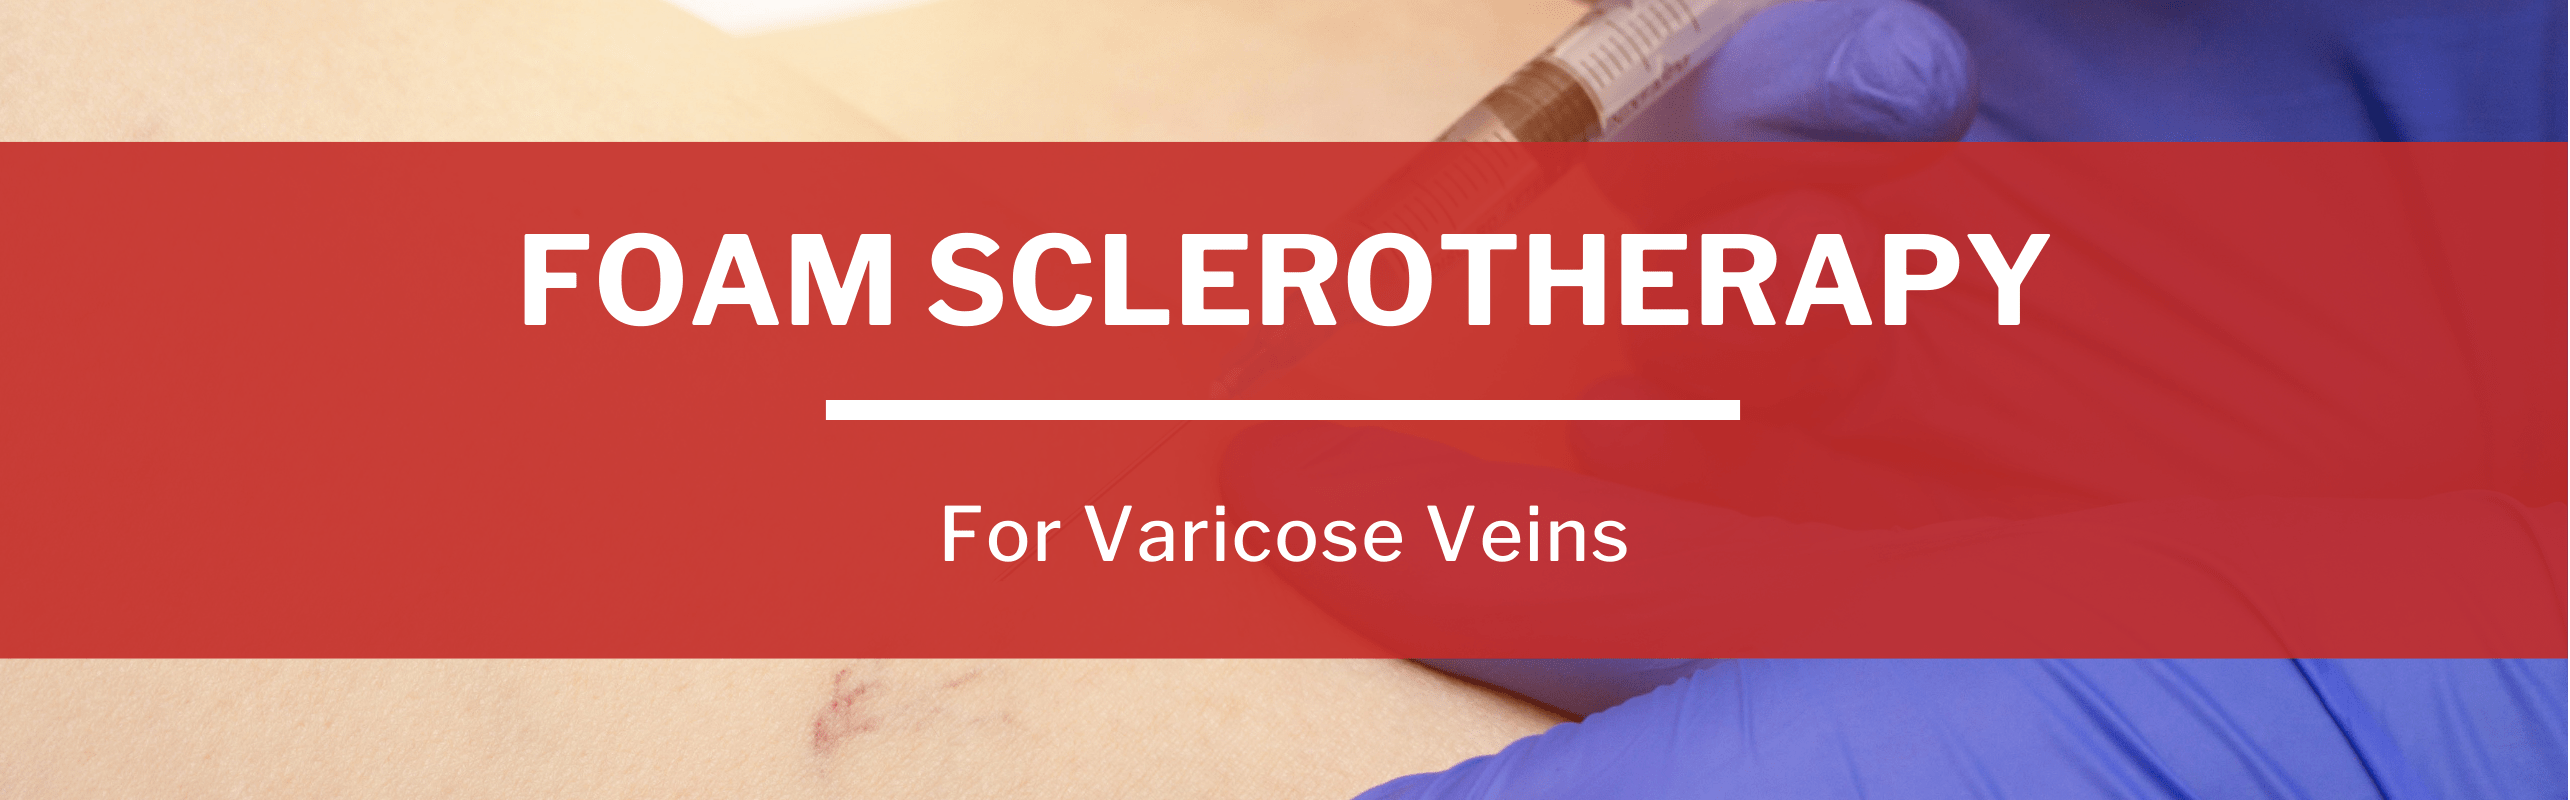 What is Foam Sclerotherapy for Varicose Veins?